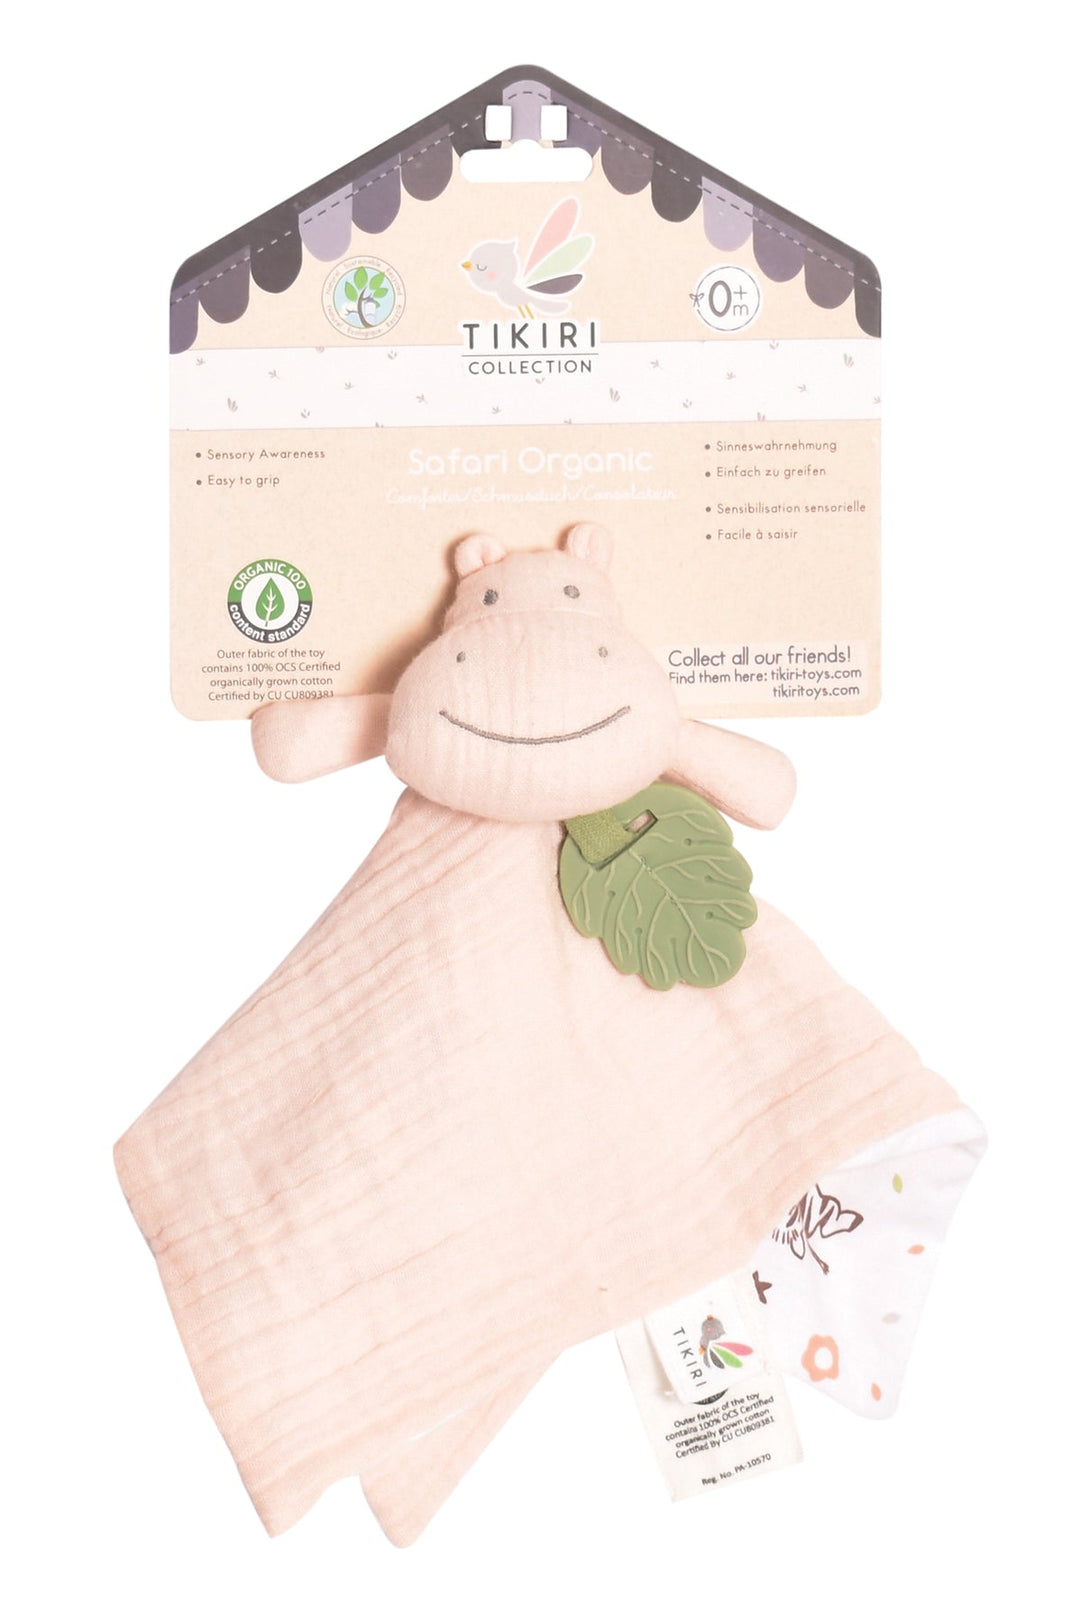 Tikiri Organic Cotton Comforter with Rubber Teether in Cotton Hippo, sold by JBørn Baby Products Shop, Personalizable by JustBørn